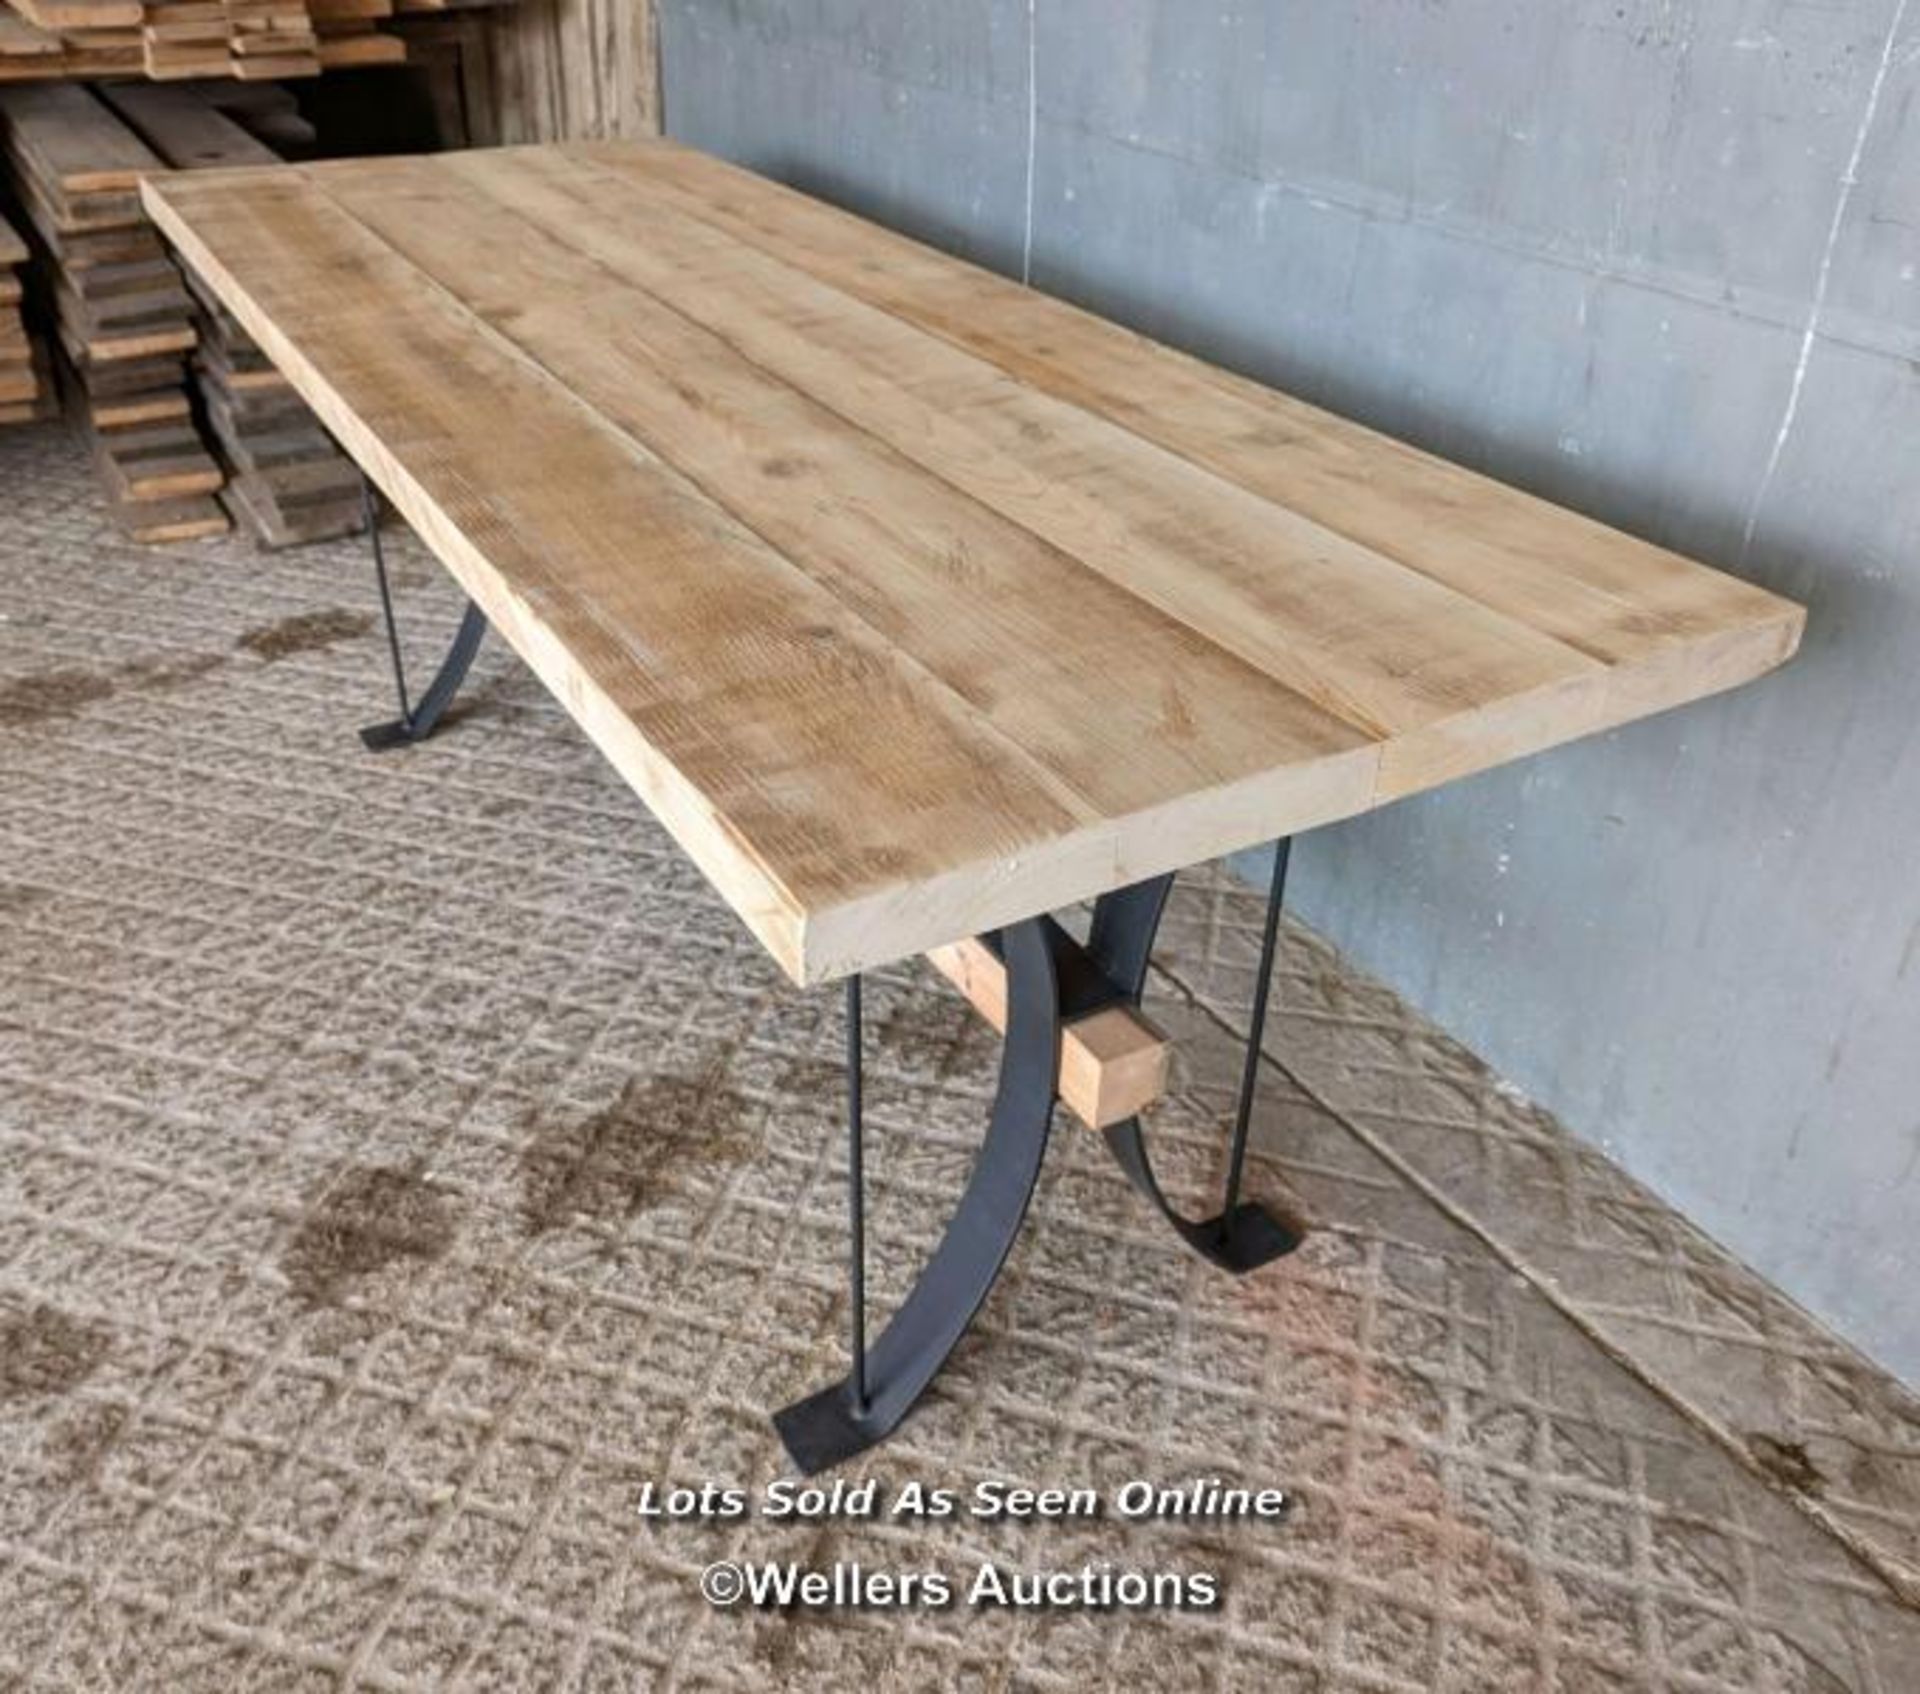 Dining table with wrought iron base and reclaimed pine top and stretcher. 8 seater. 198cm L x 78cm W